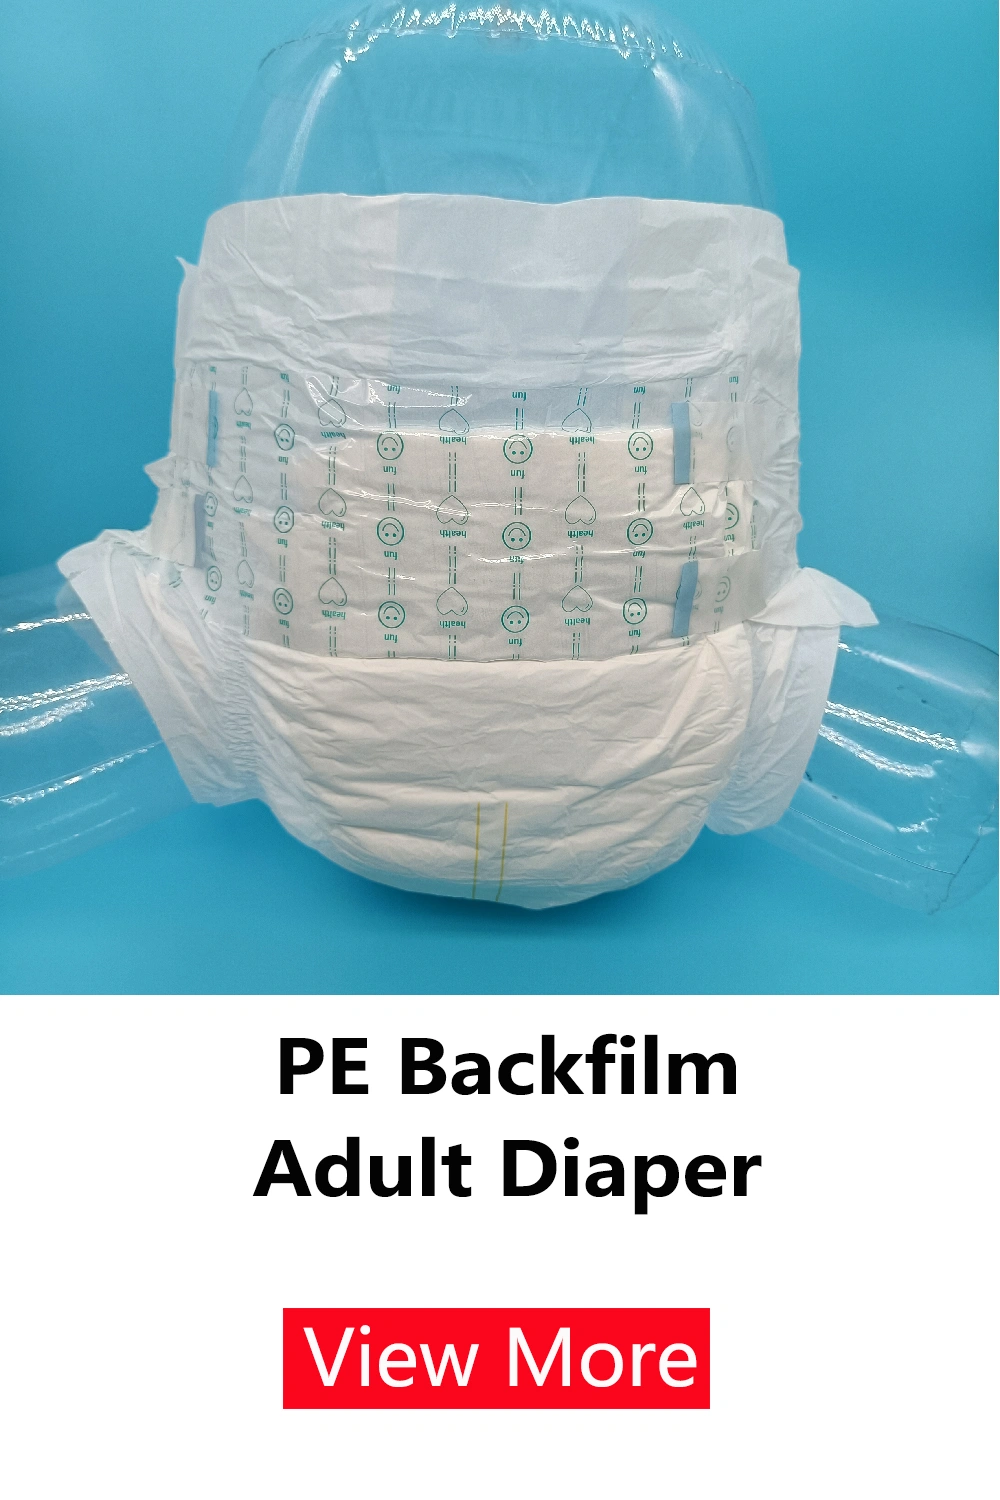 adult panty diaper related product pe backfilm adult diaper picture